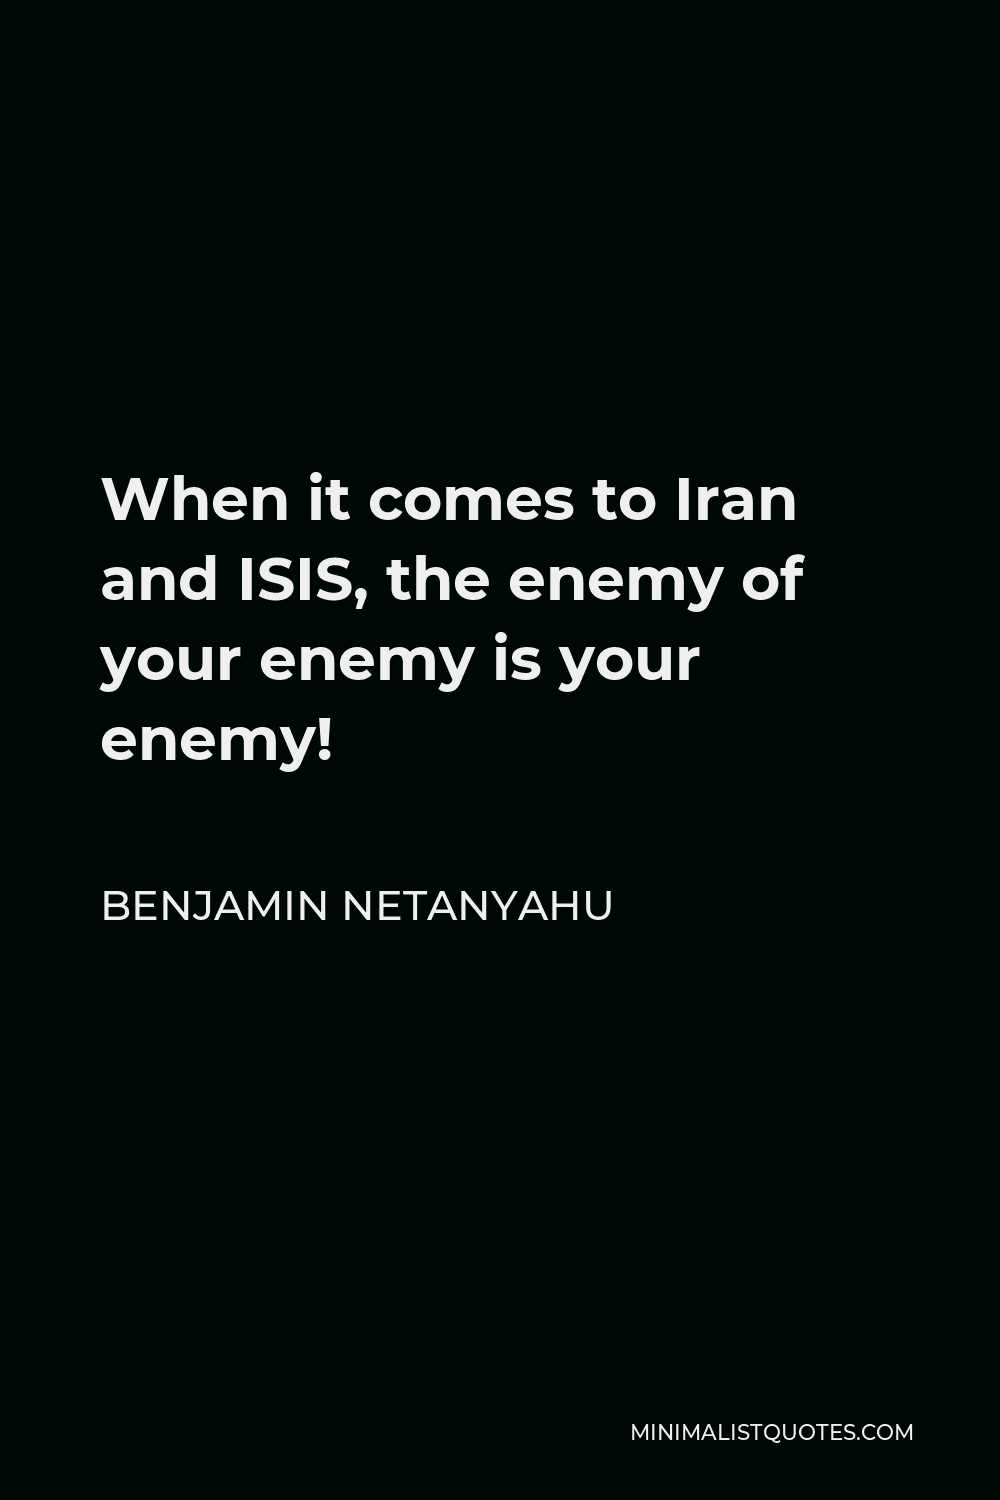 Benjamin Netanyahu Quote - When it comes to Iran and ISIS, the enemy of your enemy is your enemy!